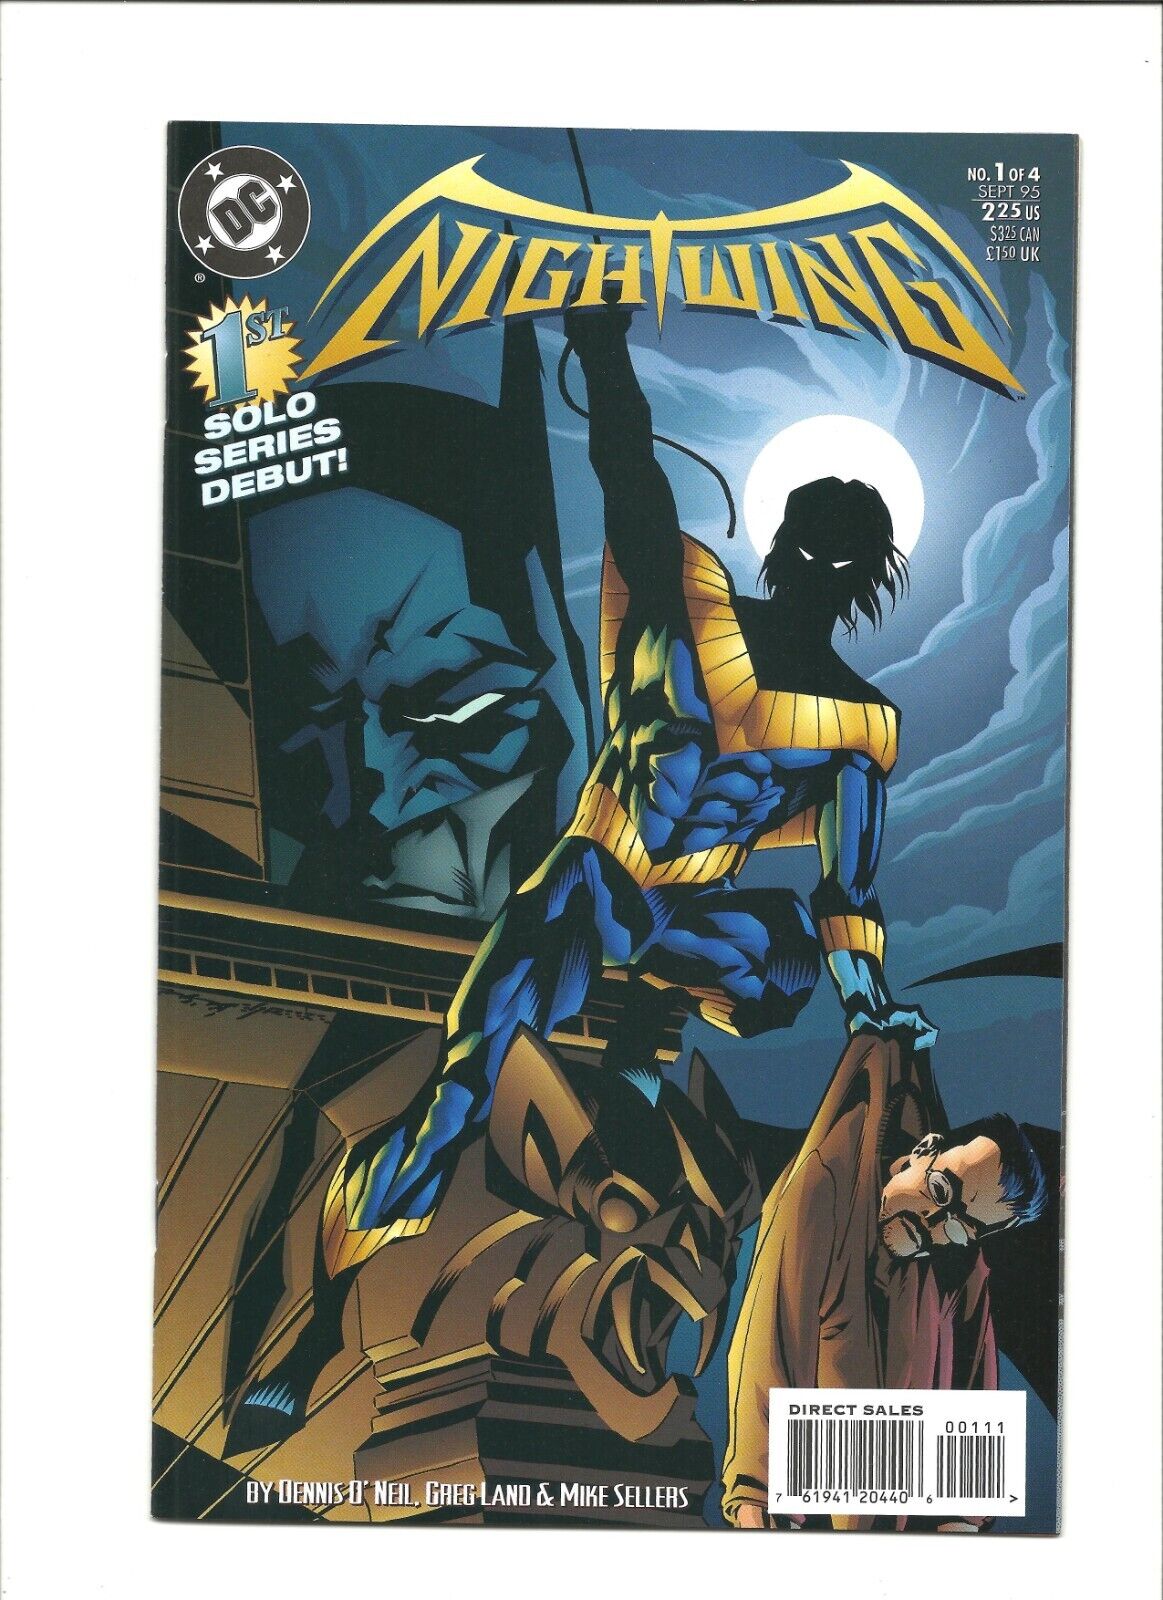 Nightwing #1 DC Comics (1995) Brian Stelfreeze Cover 1st Solo Series